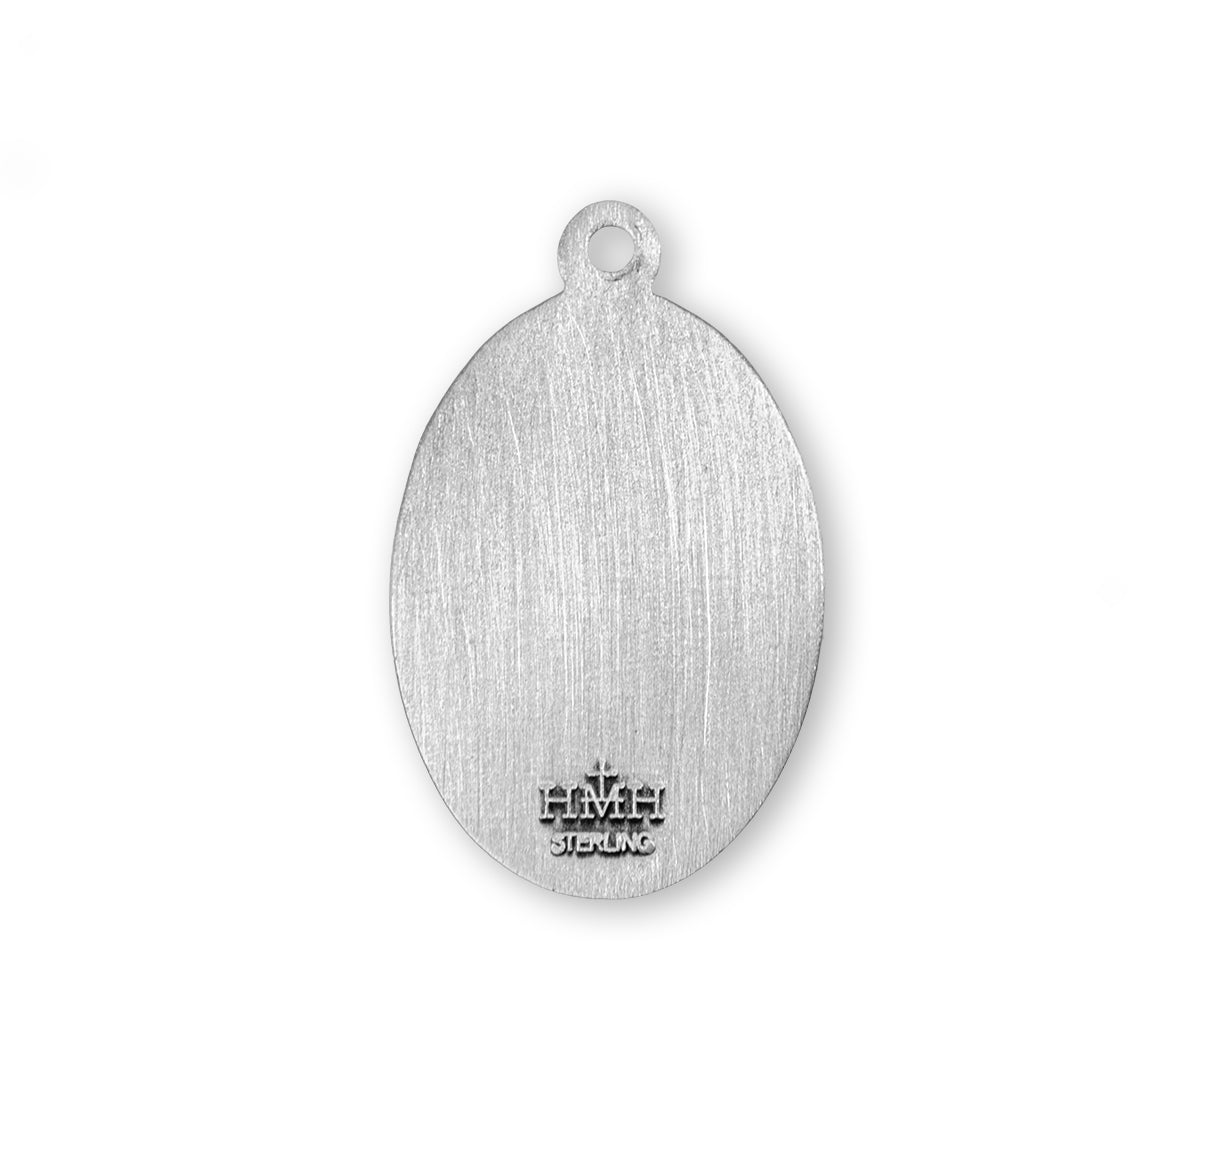 St. Emily Sterling Silver Medal Necklace